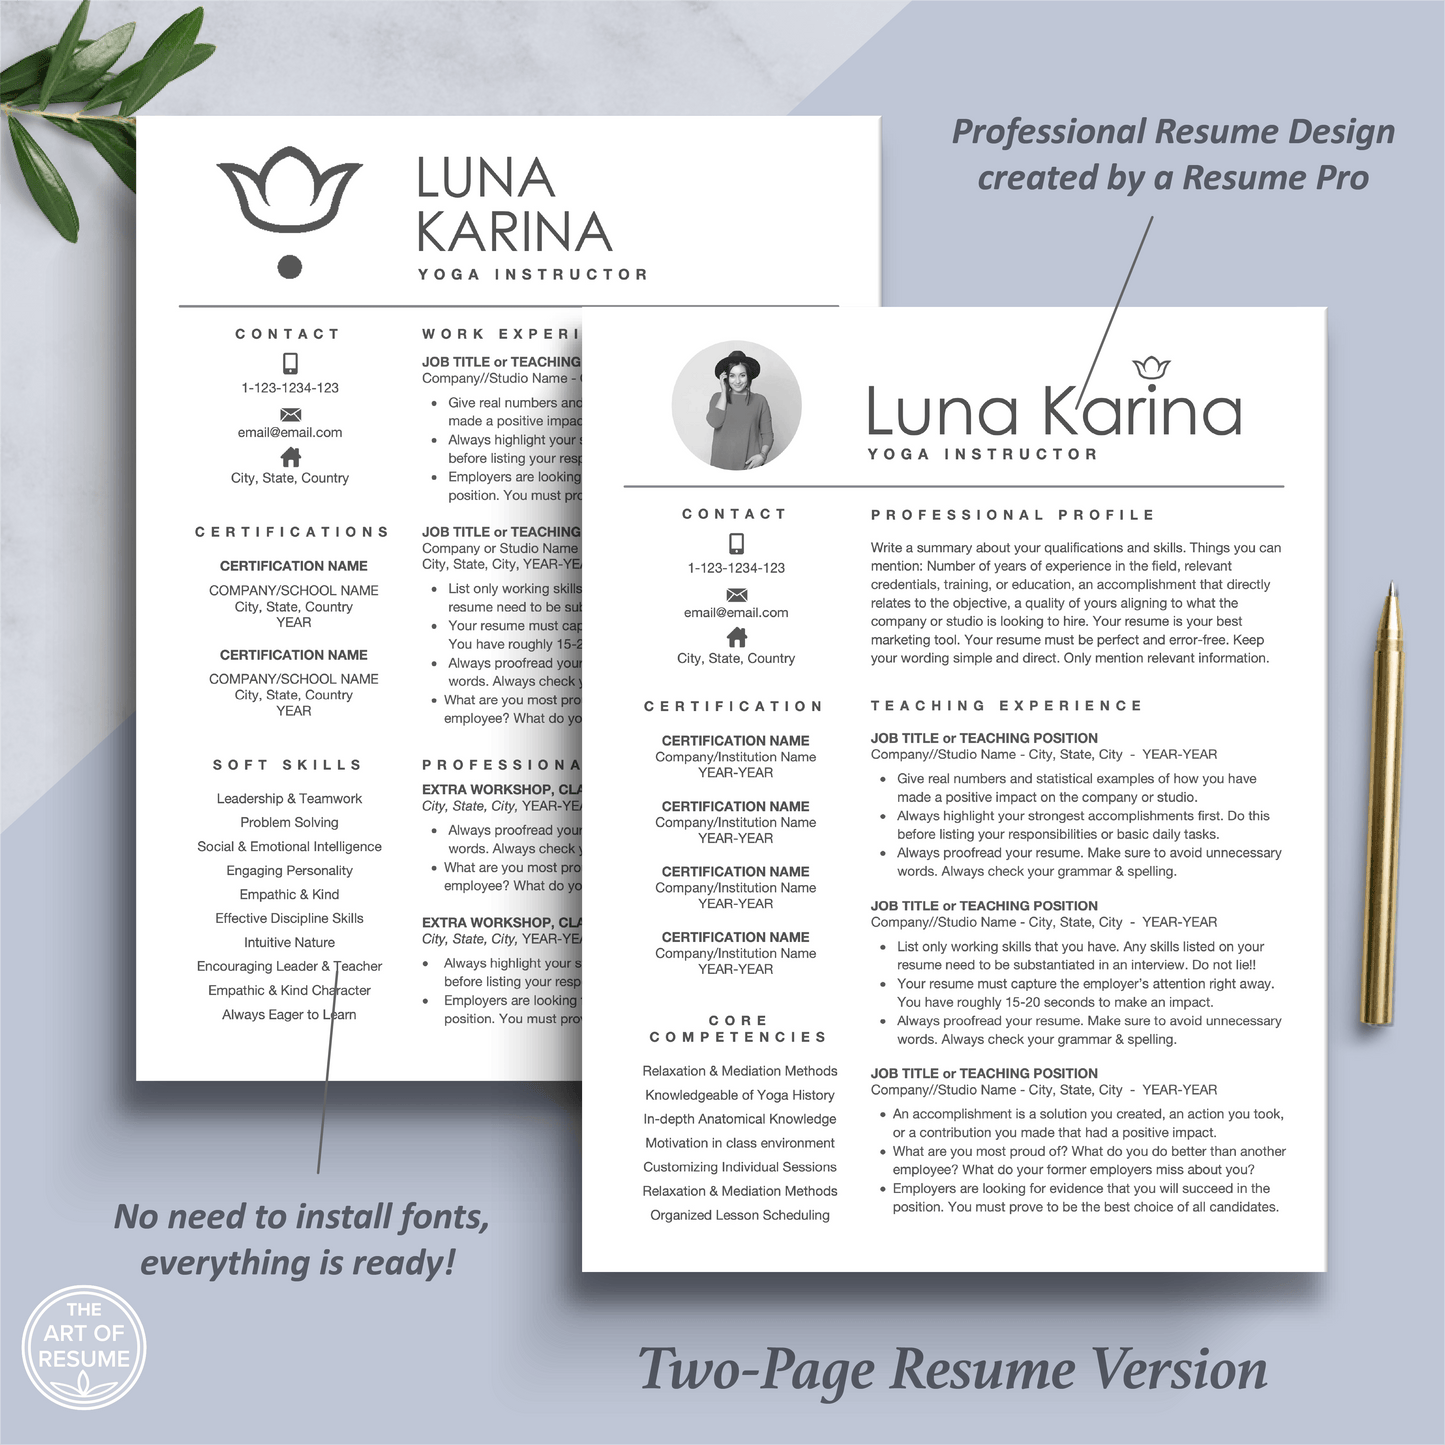 The Art of Resume Templates | Two Page Professional Professional Yoga, Fitness, Designer, Wellness, Executive Resume CV Template | Curriculum Vitae